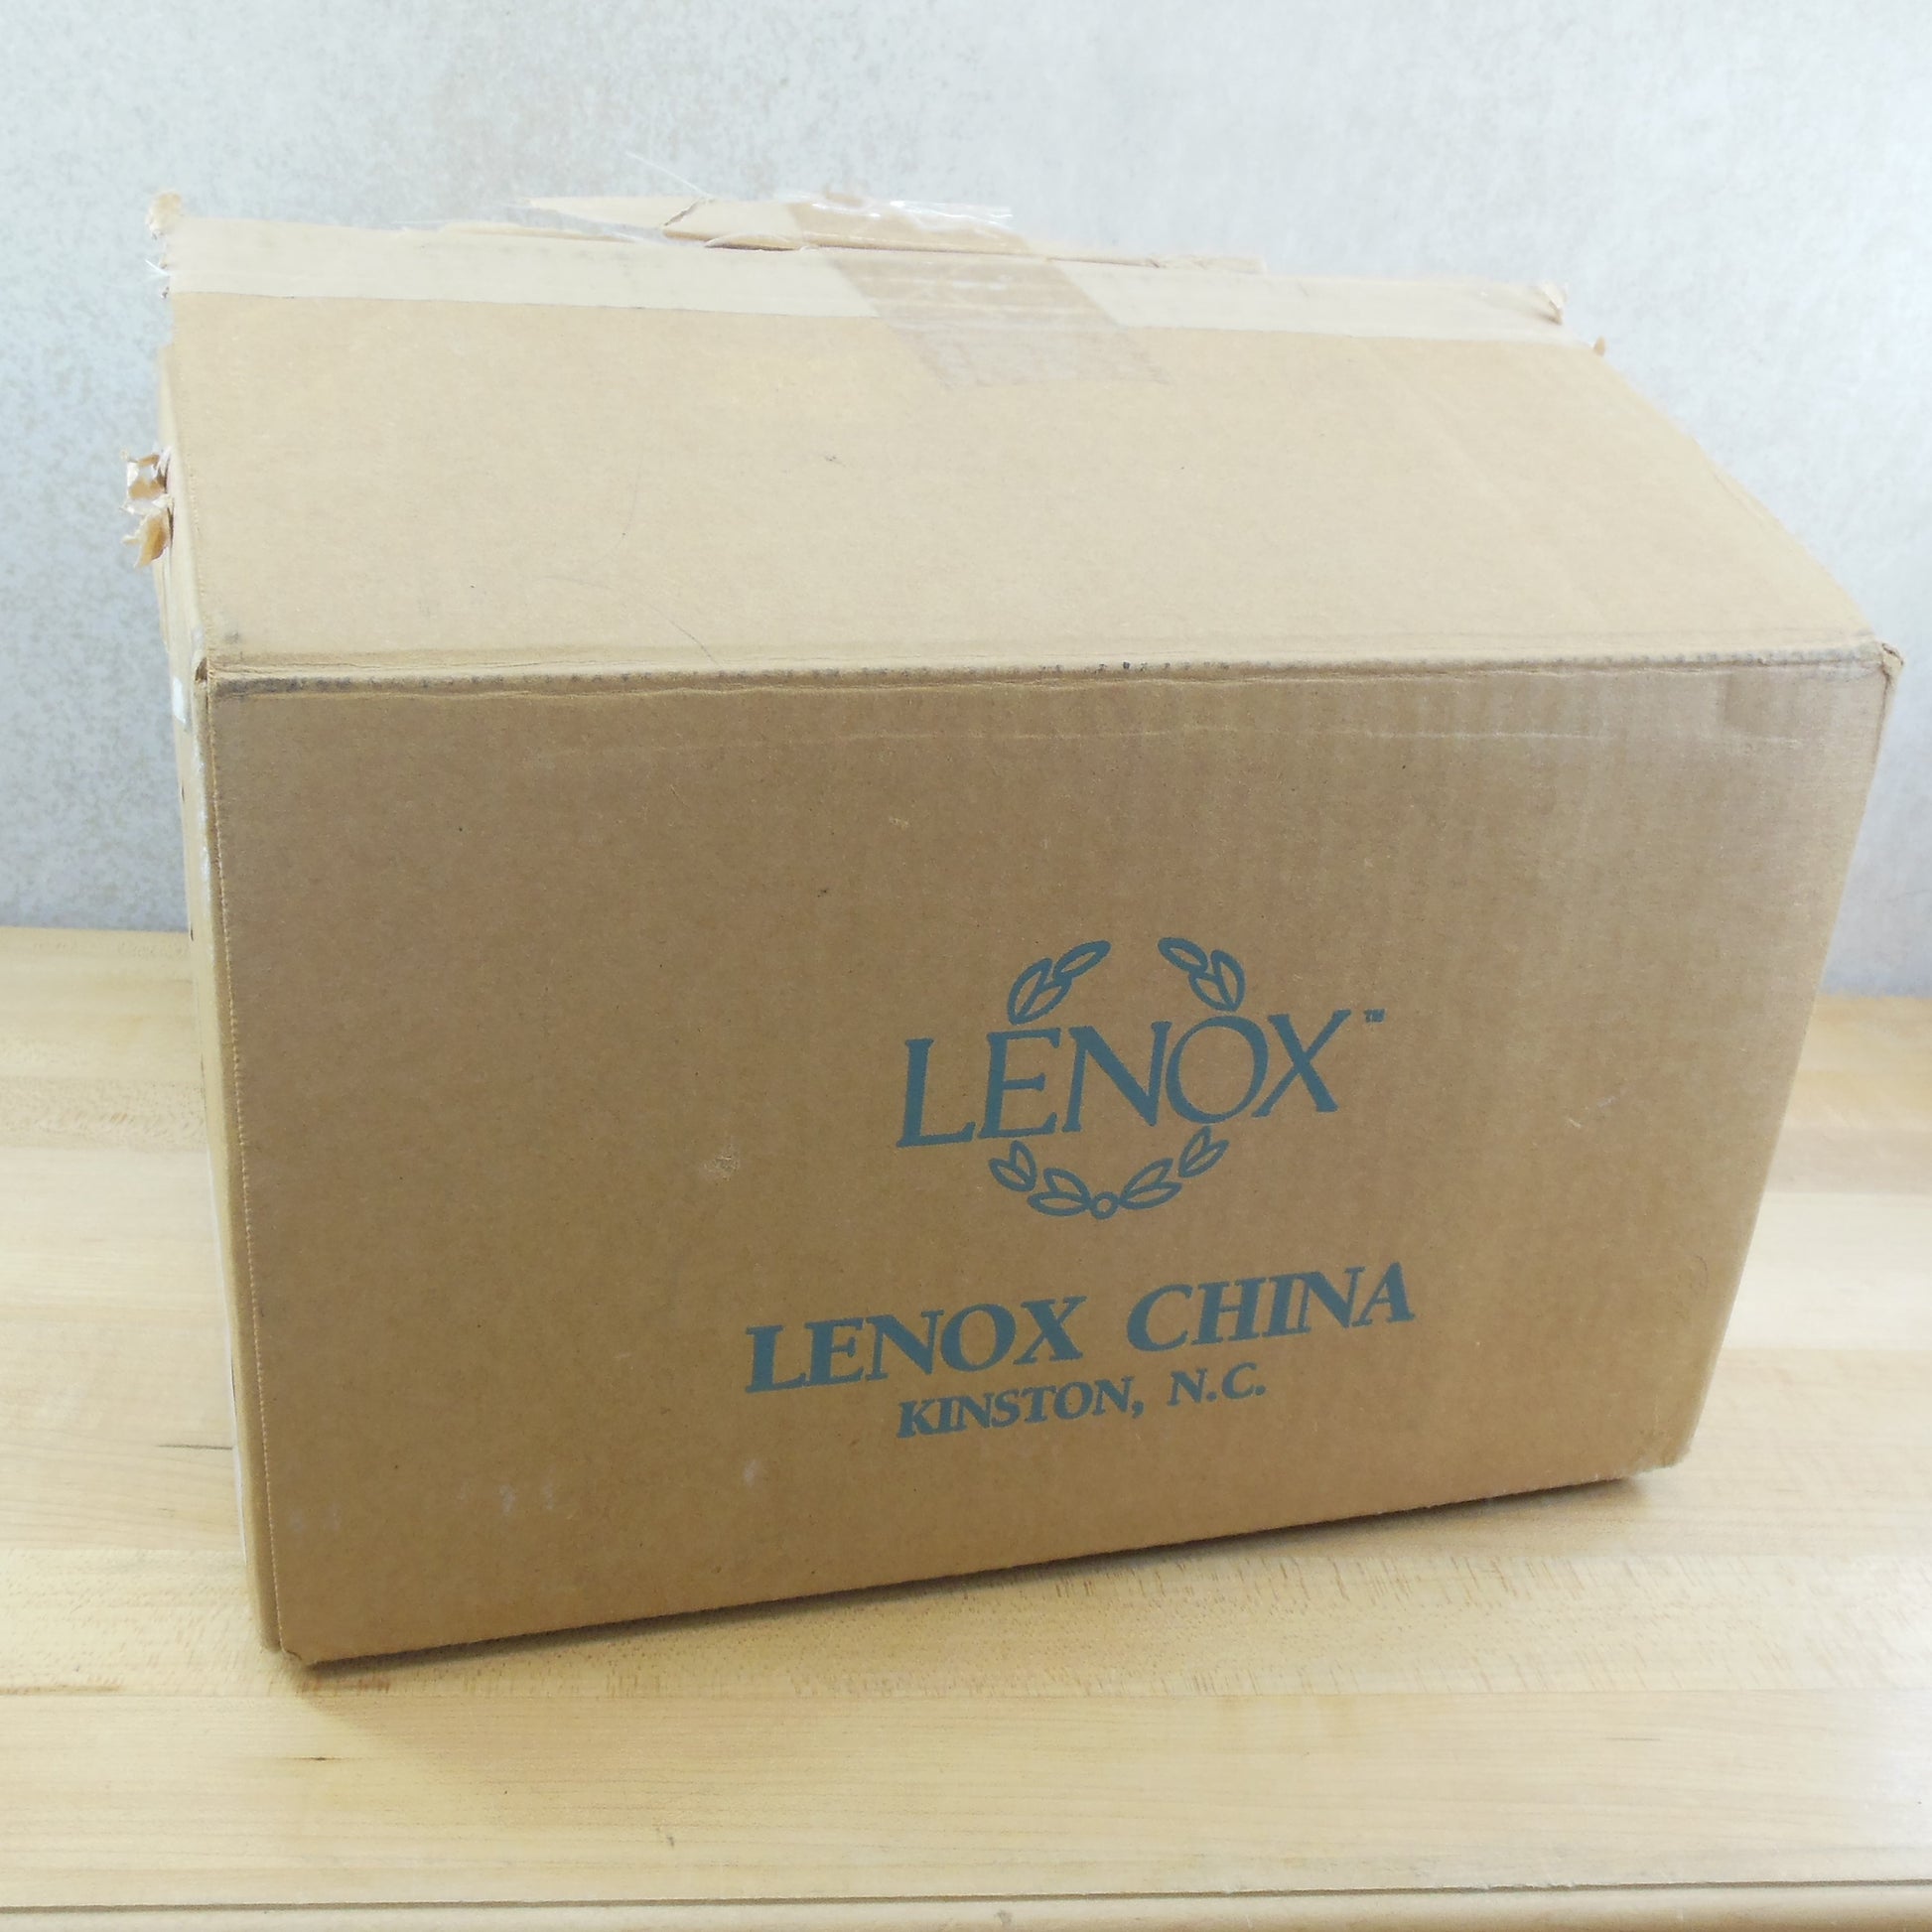 Lenox Fine China Courtyard Gold 5 Piece Place Setting - New in Box vintage